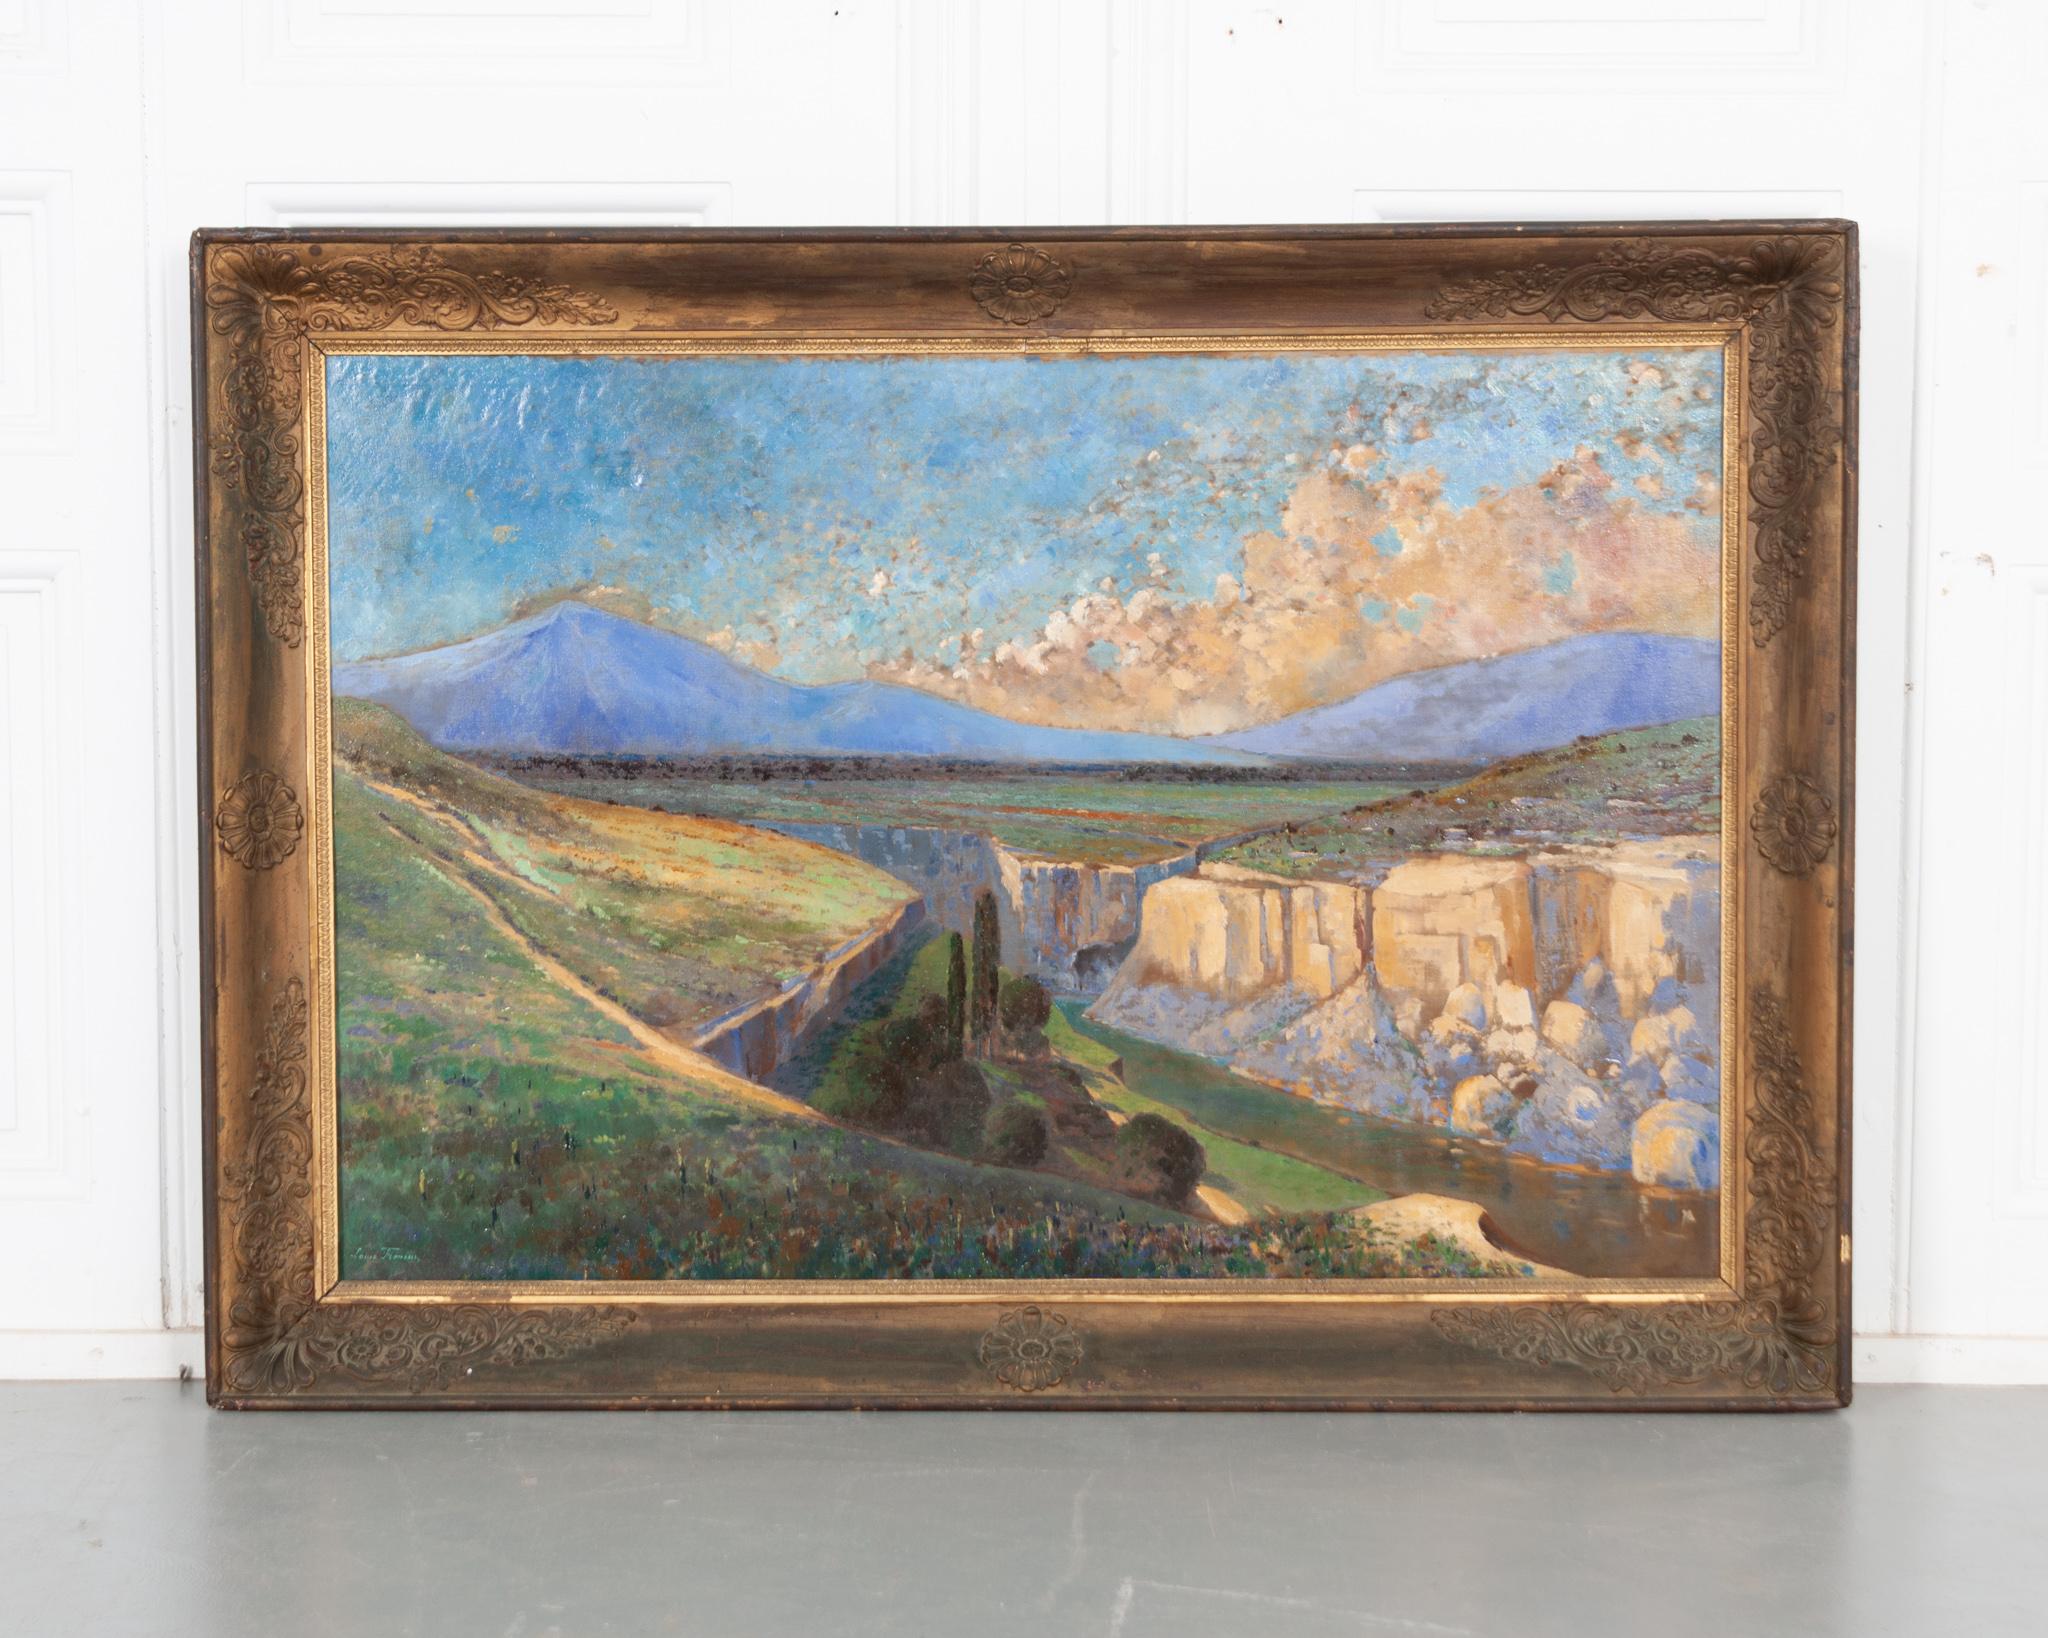 French 19th Century oil on canvas landscape scene; signed by artist. Intricate carved, gilt frame with a wonderful patina. Ready to be hung wherever you need a sophisticated pop of color! The canvas and frame have been professionally cleaned and